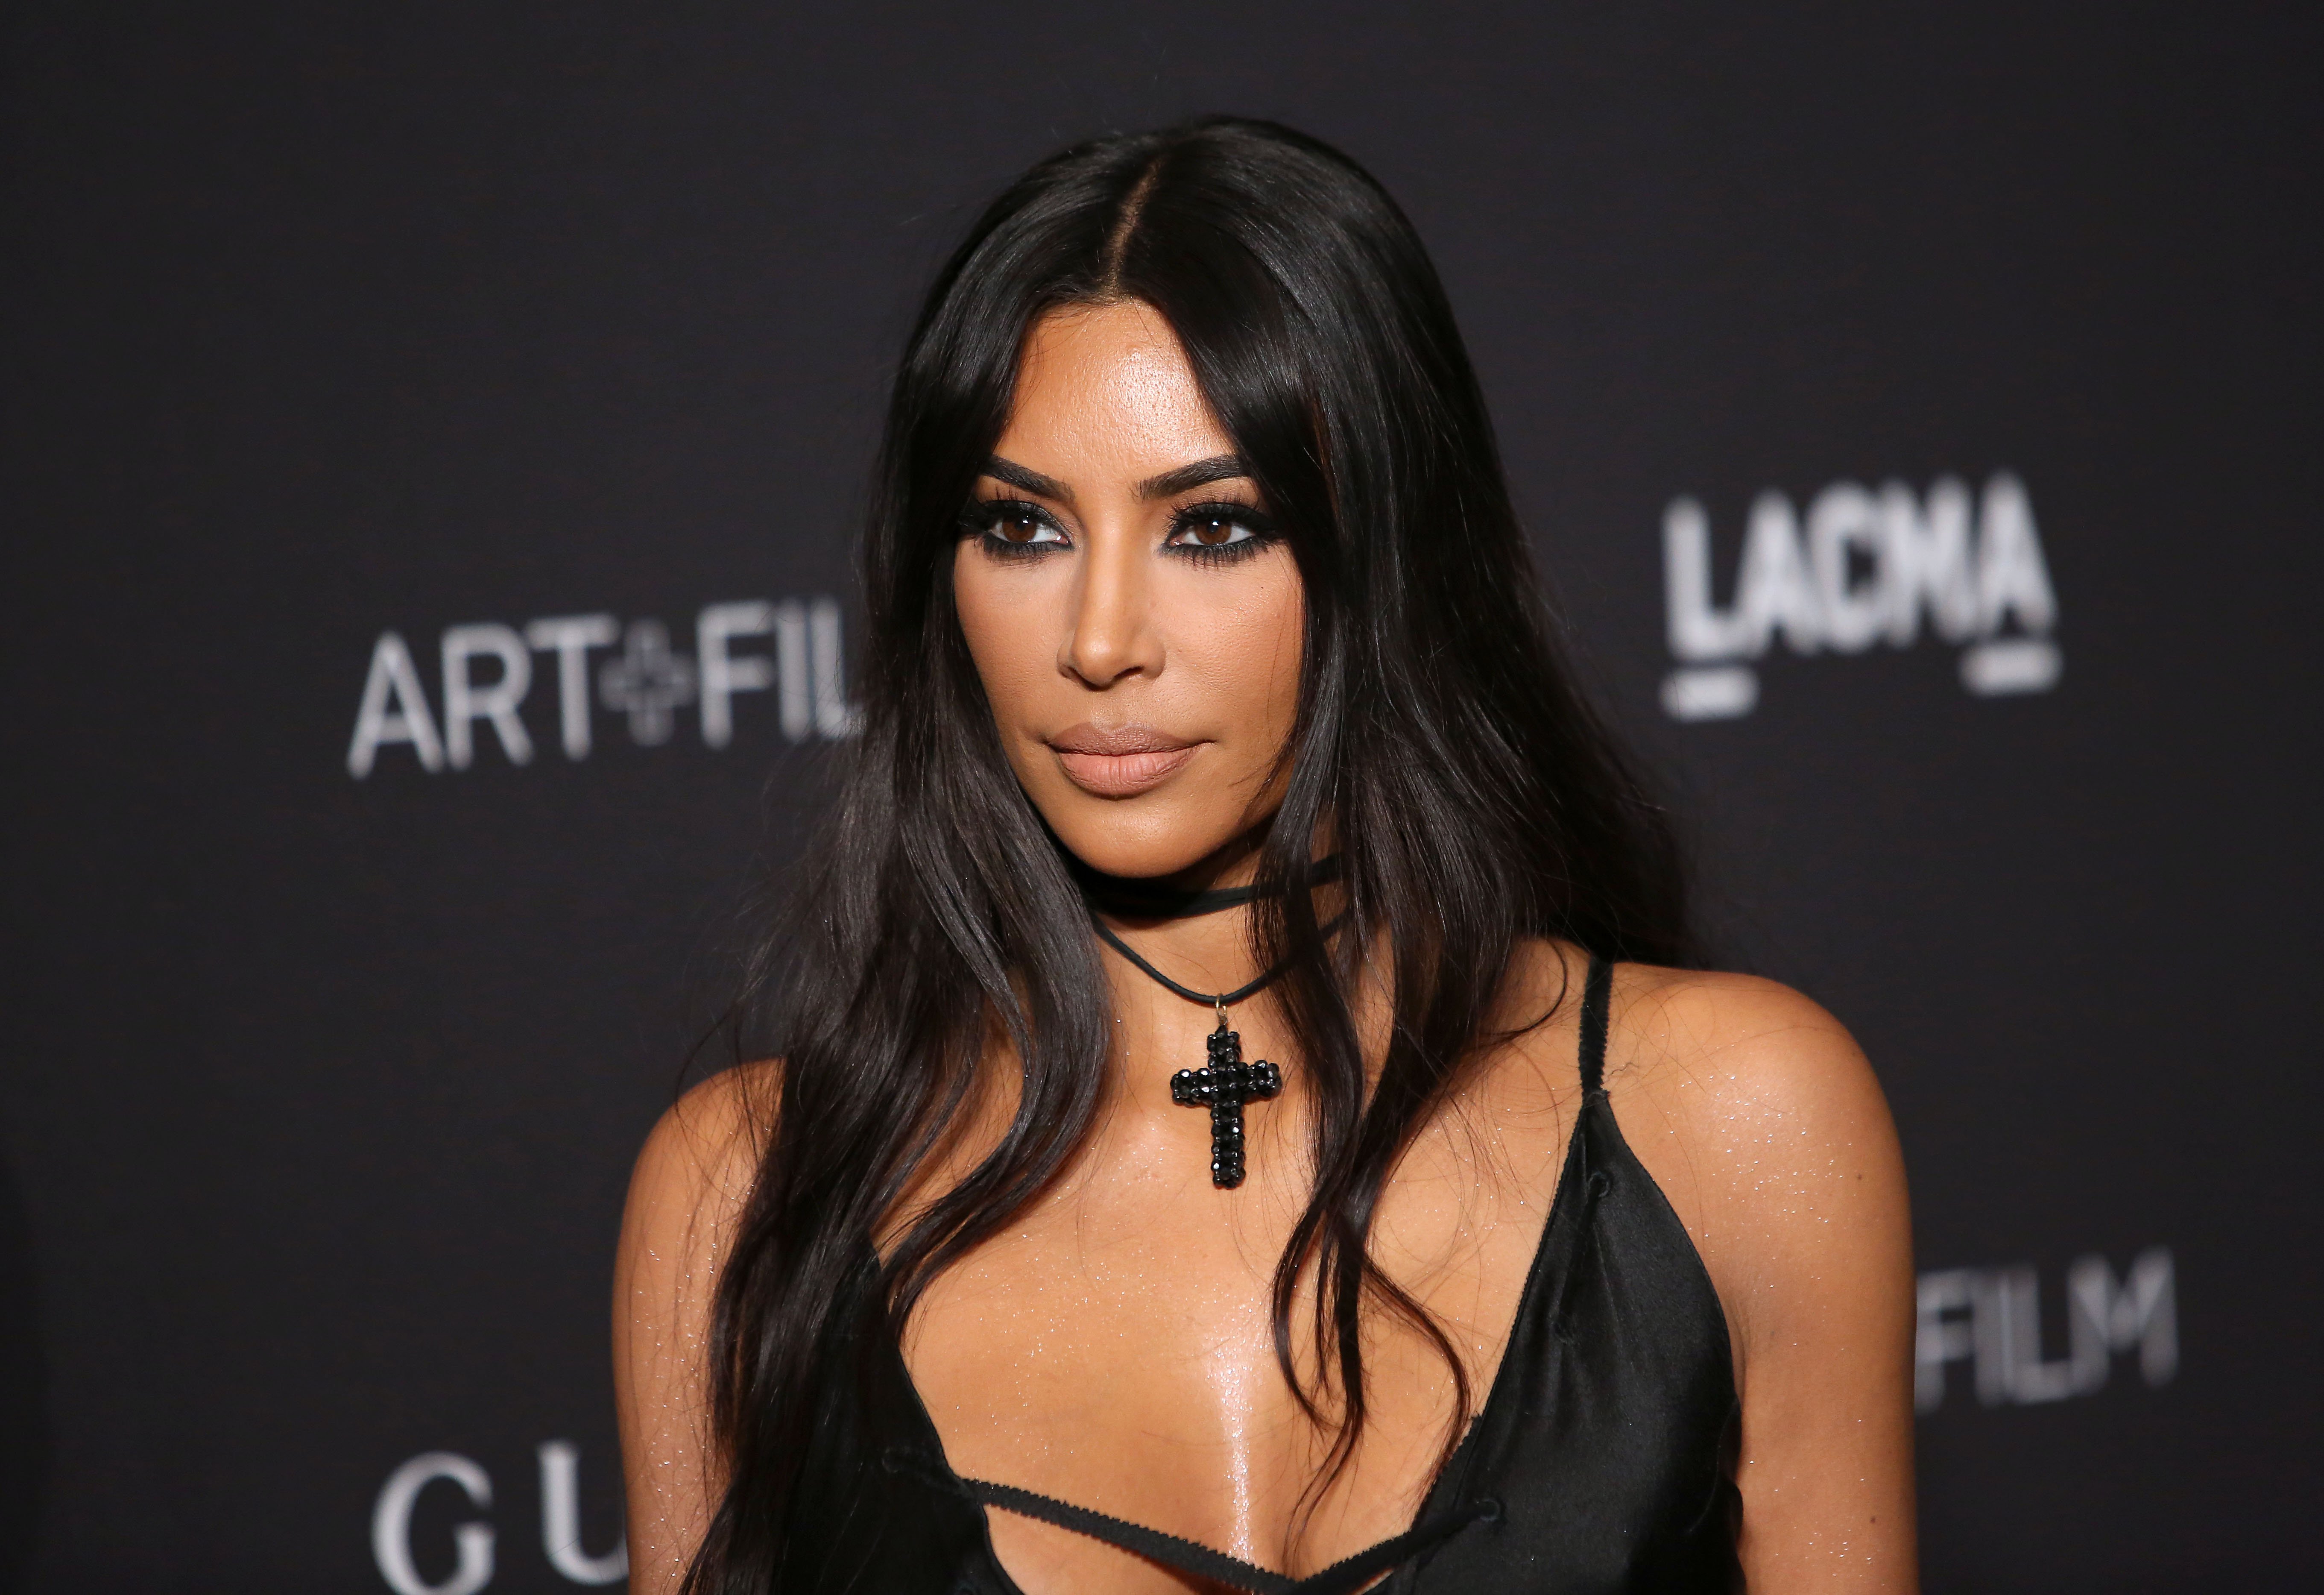 Kim Kardashian attends the LACMA Art + Film Gala at LACMA on November 03, 2018 in Los Angeles, California | Photo: Getty Images